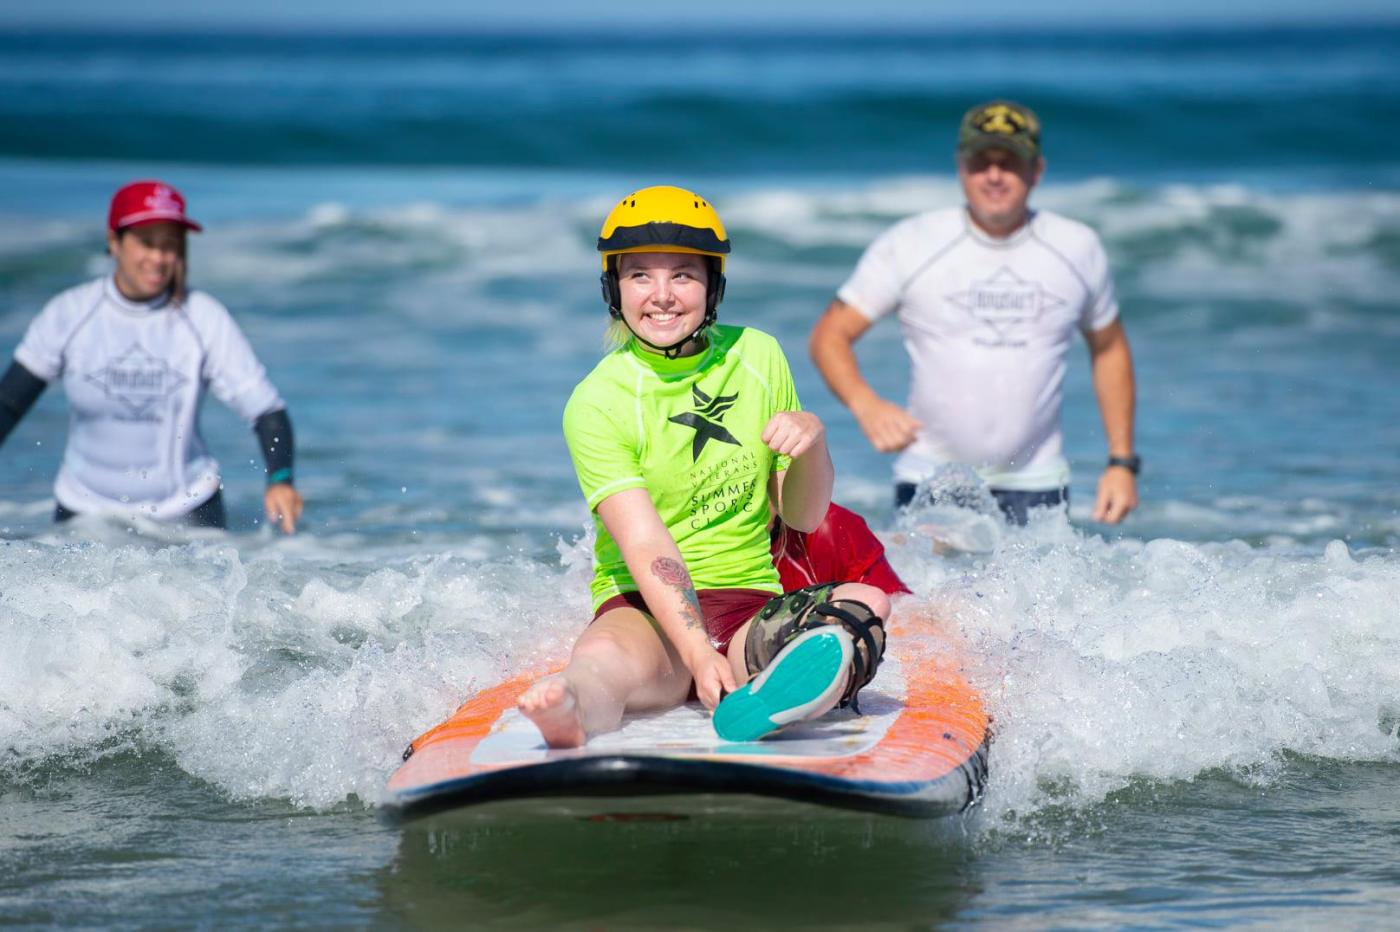 Olivia Nord surfs at the Summer Sports Clinic in San Diego.